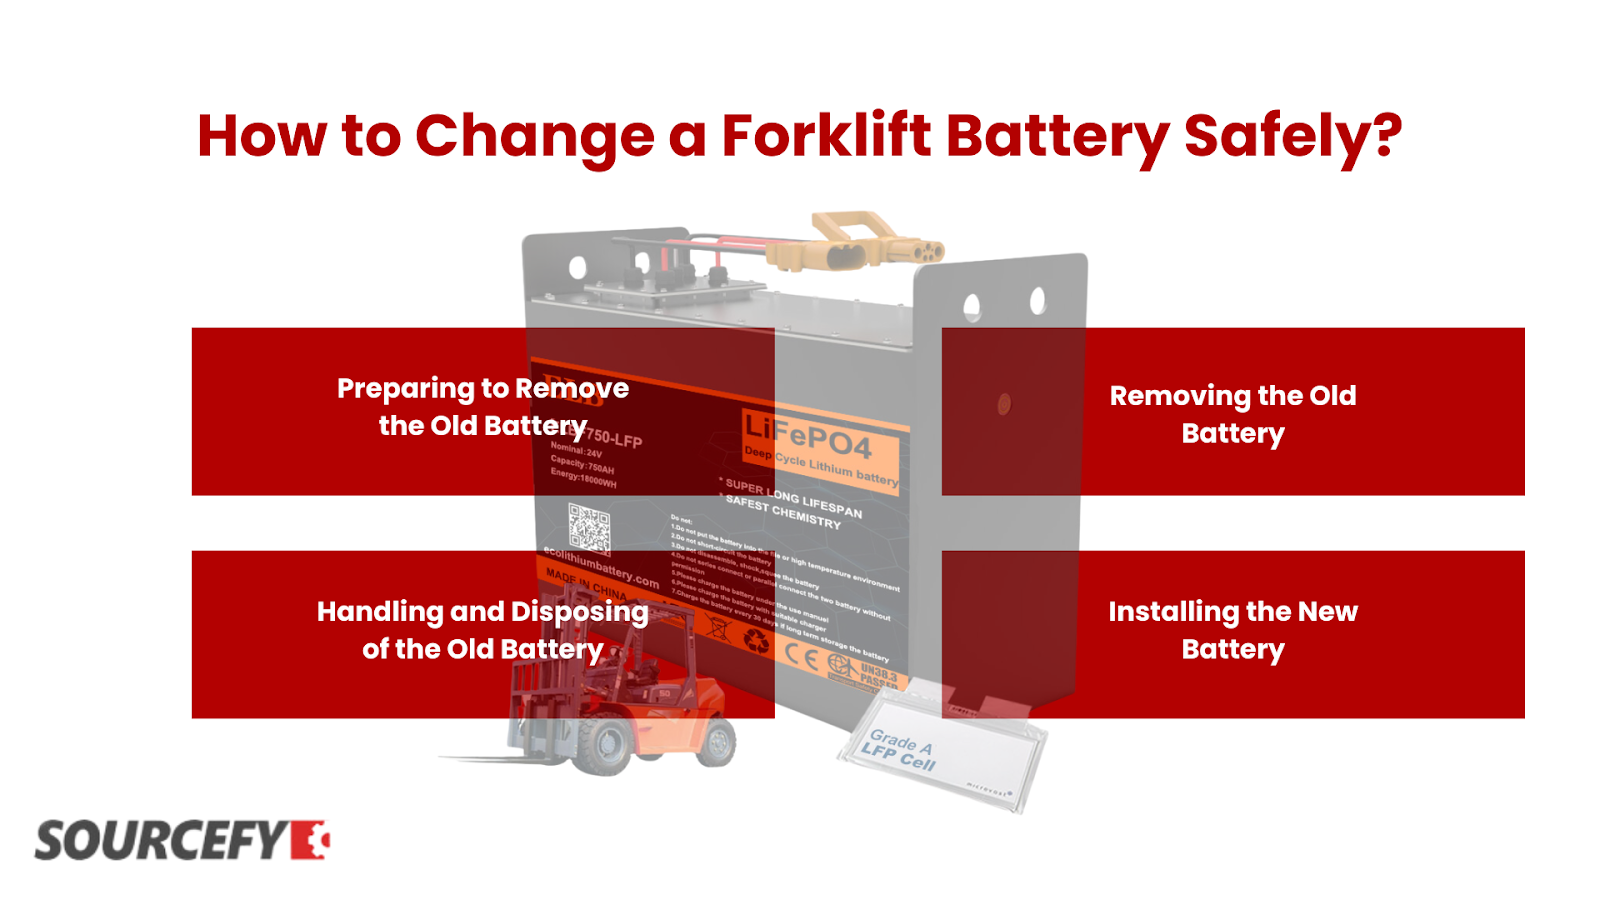 How to Change a Forklift Battery Safely?